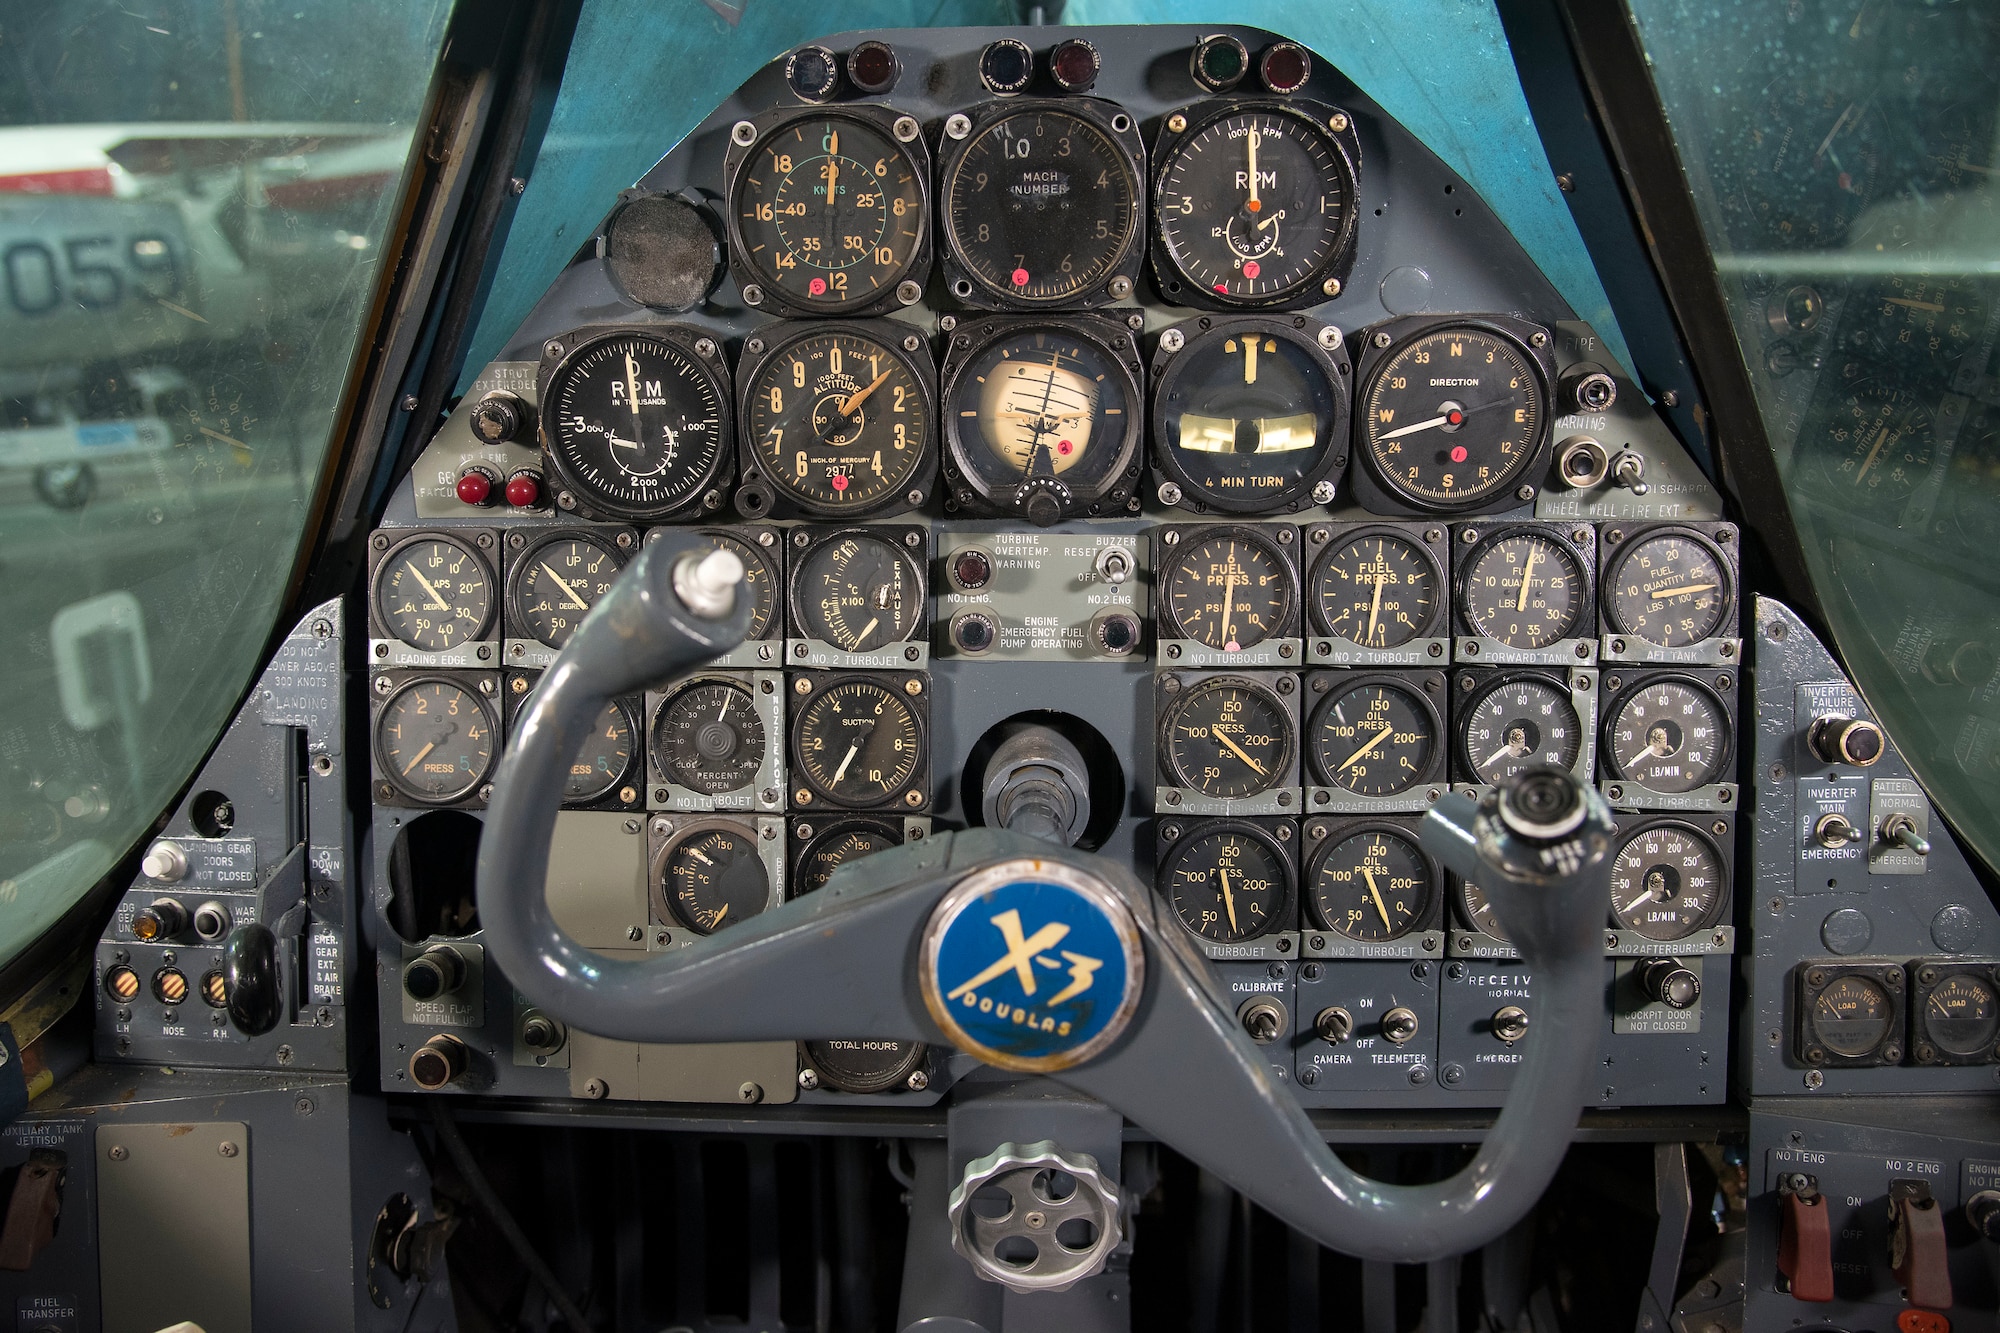 DAYTON, Ohio -- Douglas X-3 Stiletto cockpit at the National Museum of the United States Air Force. This aircraft is on display in the museum's Research & Development Gallery. (U.S. Air Force photo by Ken LaRock)